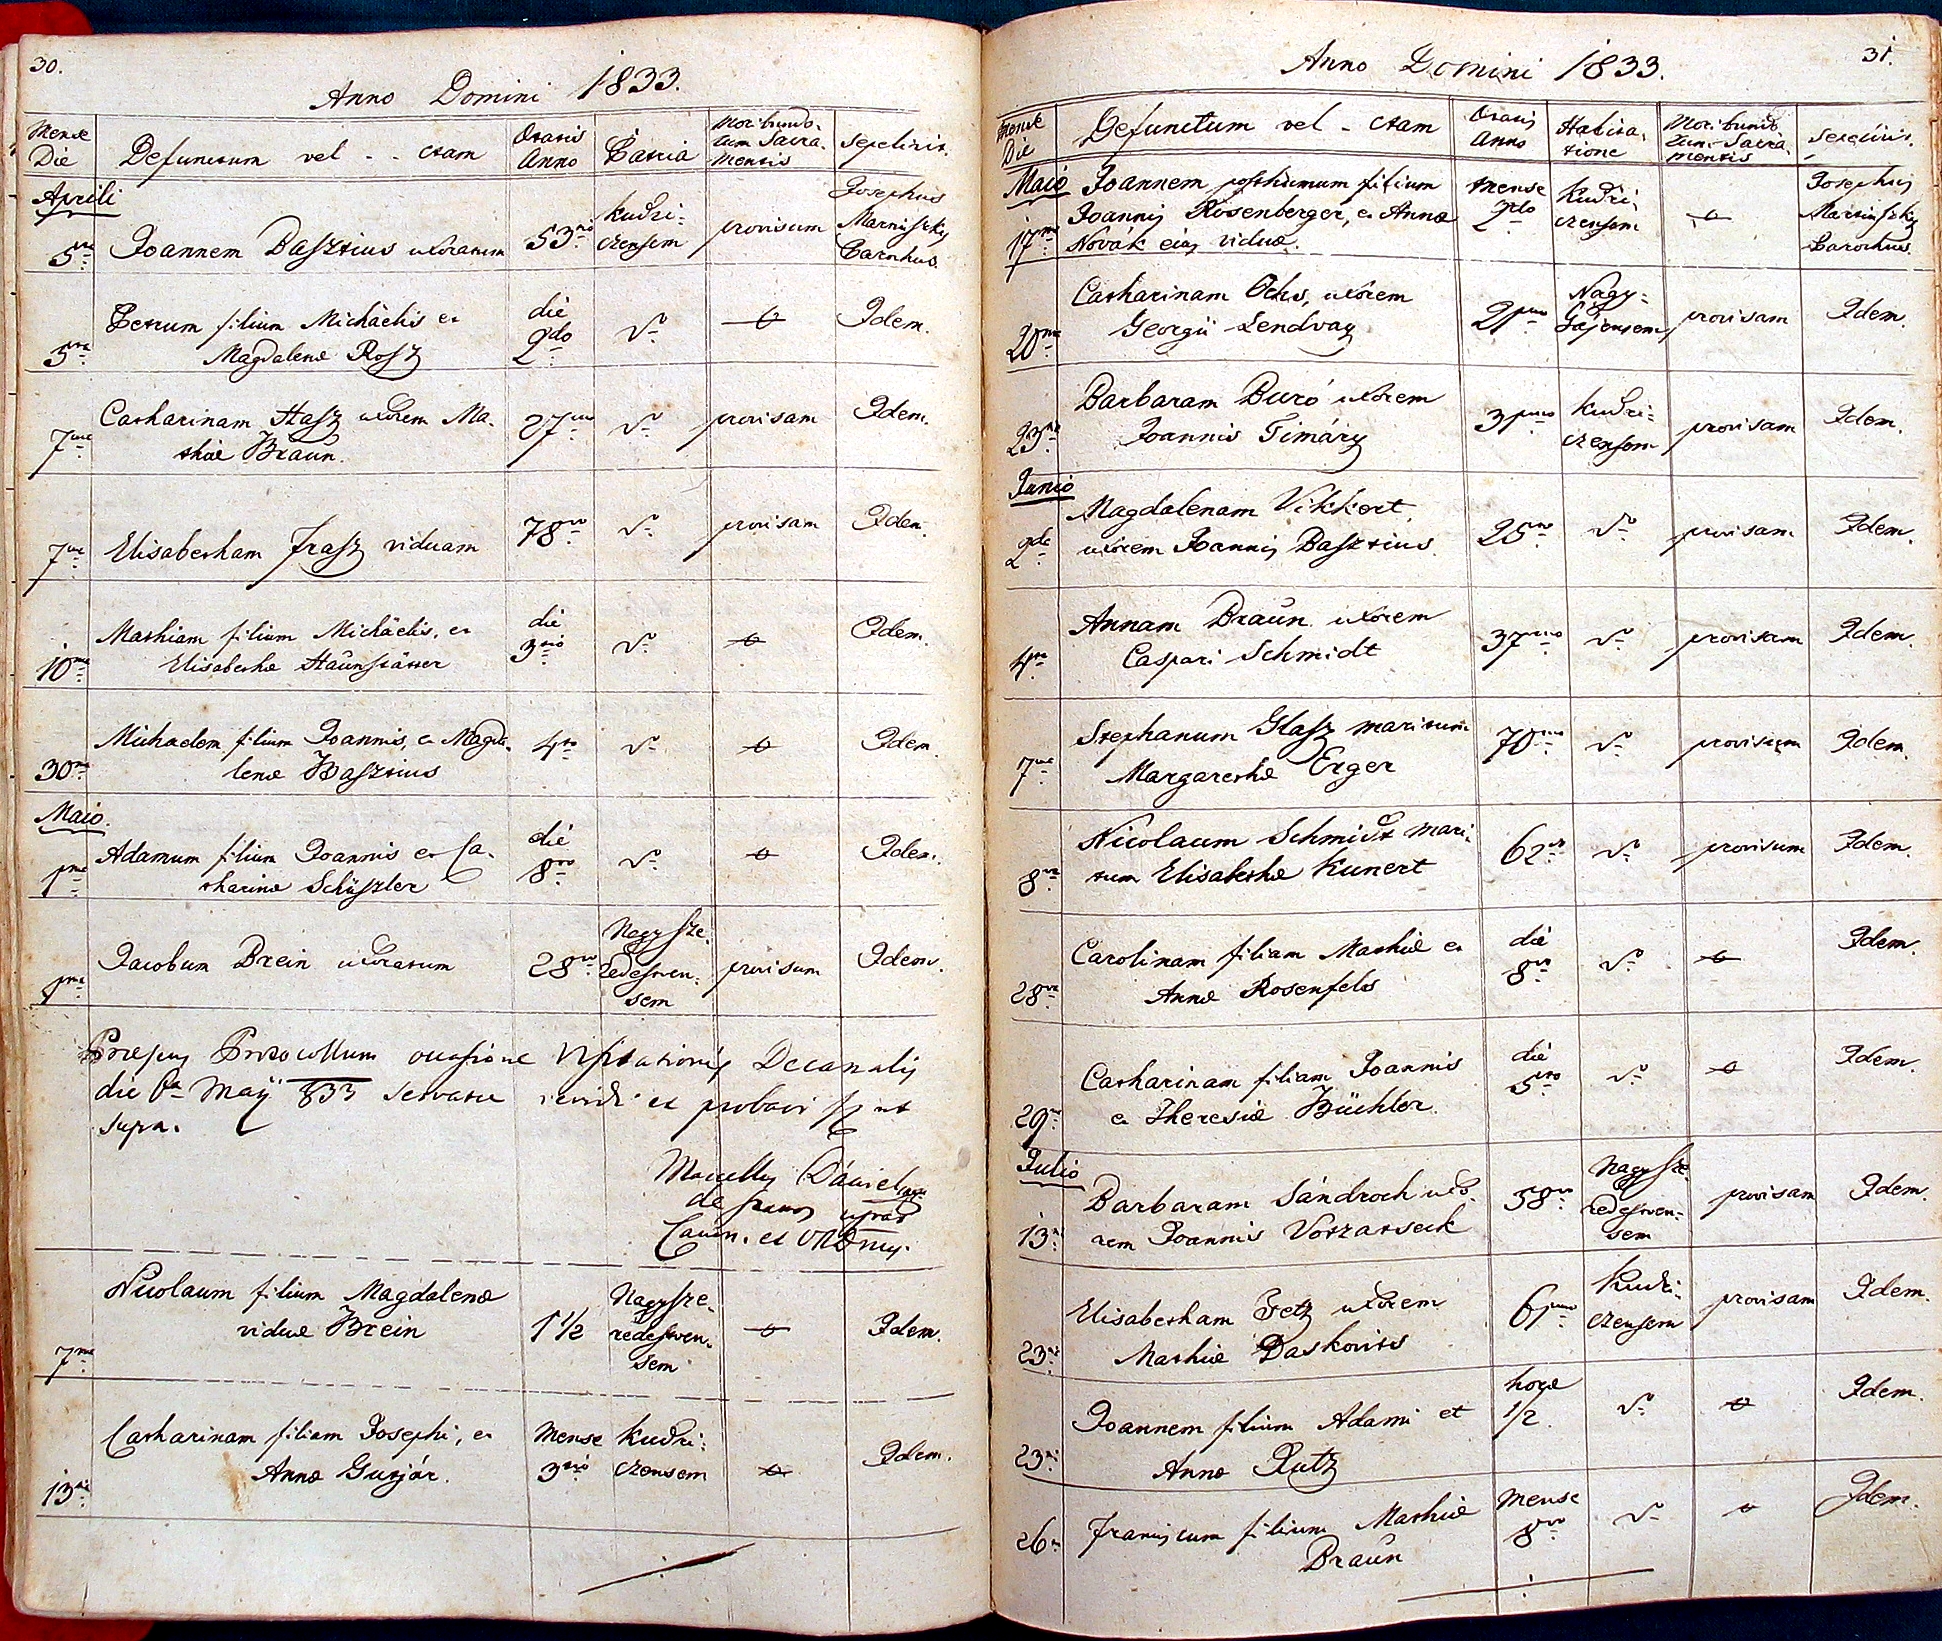 images/church_records/DEATHS/1775-1828D/030 i 031